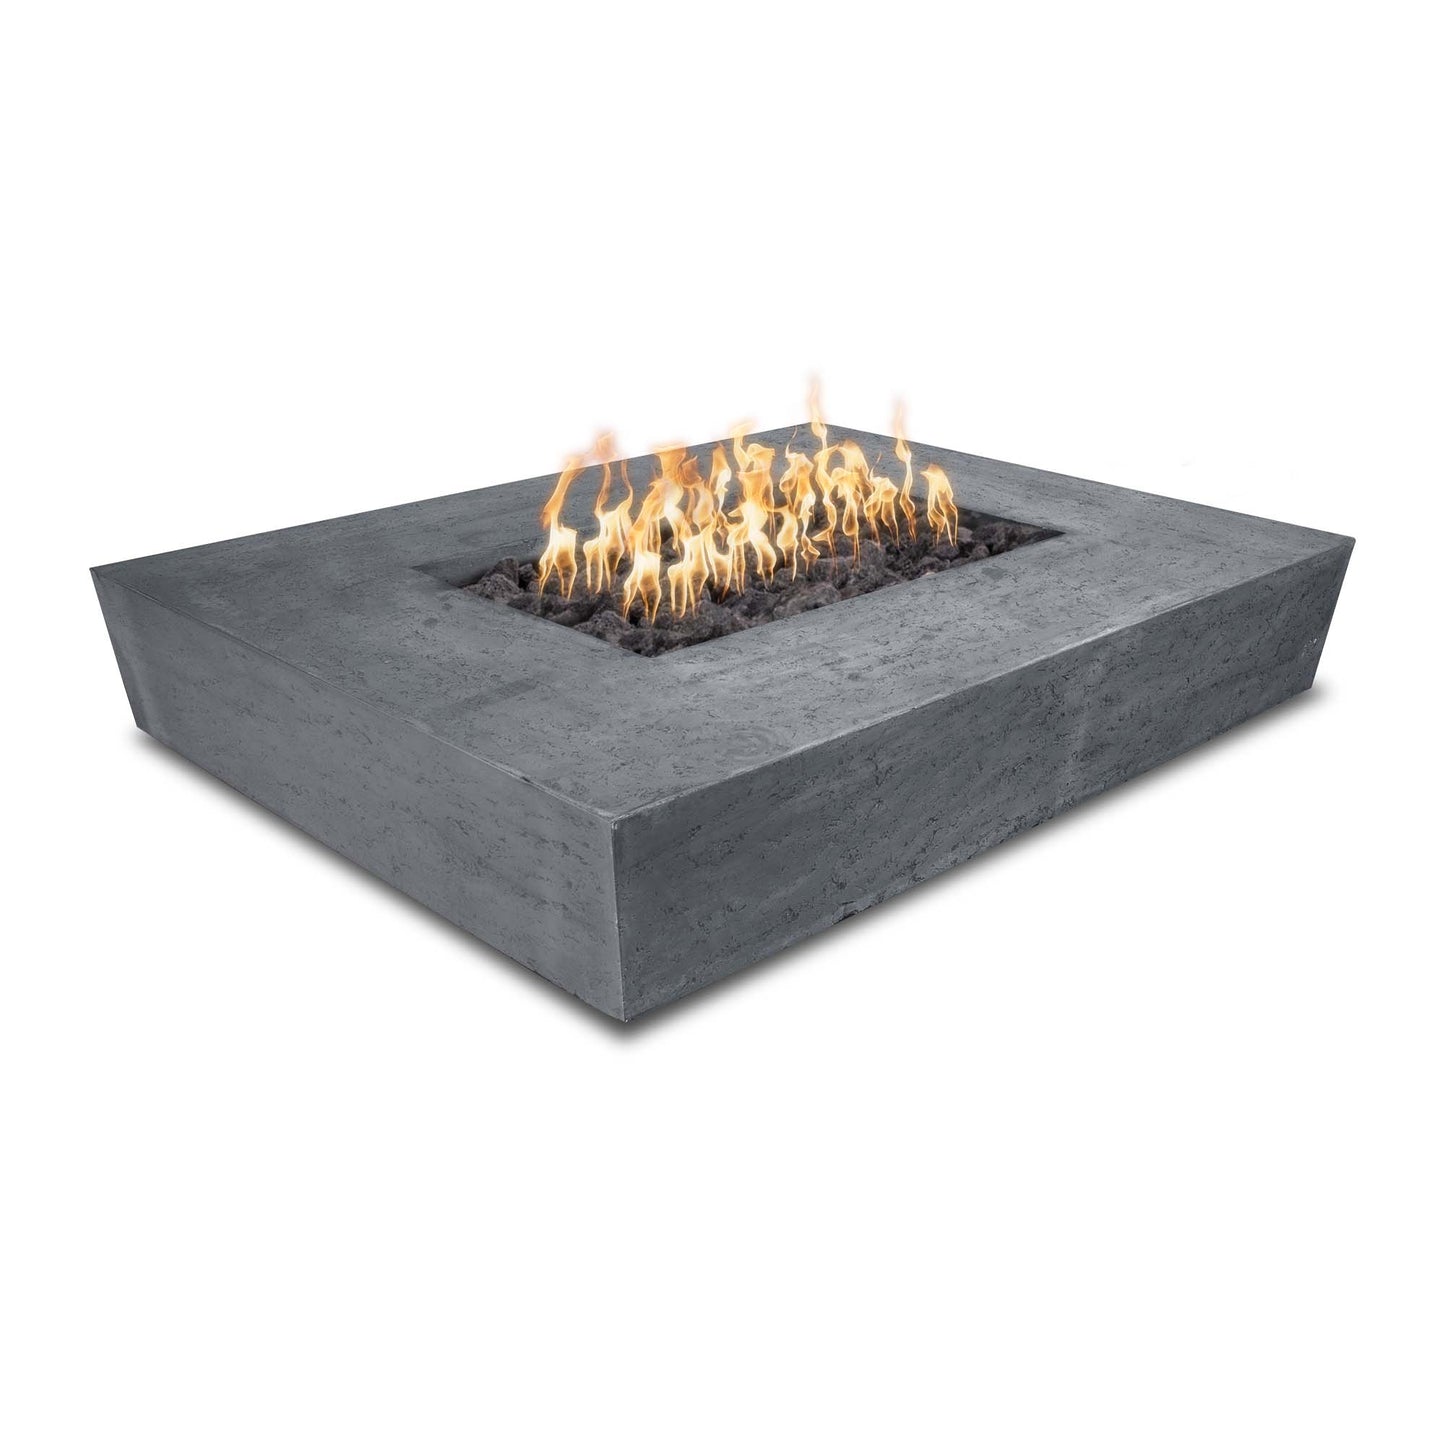 The Outdoor Plus Rectangular Heiko 58" Rustic Moss Stone GFRC Concrete Natural Gas Fire Pit with Match Lit Ignition